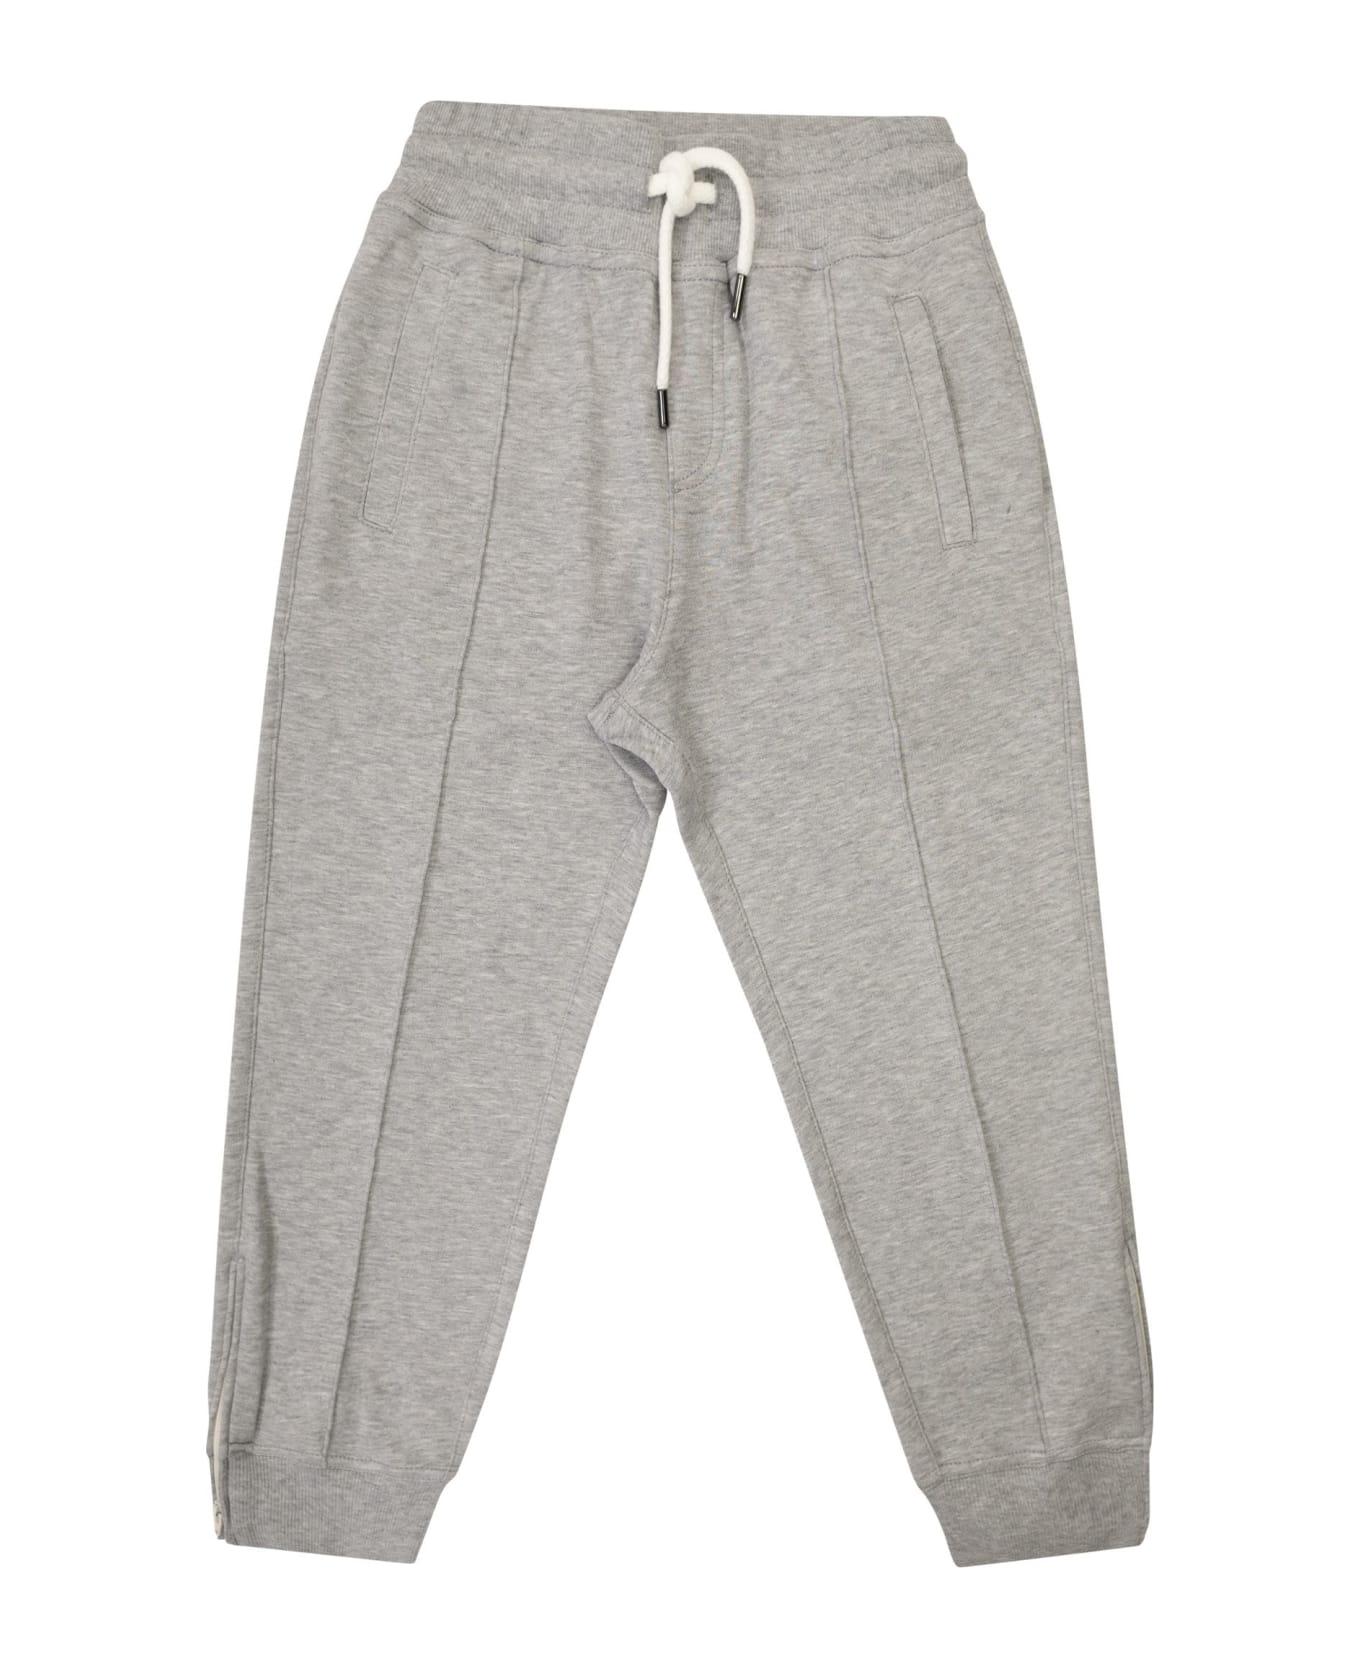 Techno Cotton Fleece Trousers With Crête And Elasticated Bottom With Zip